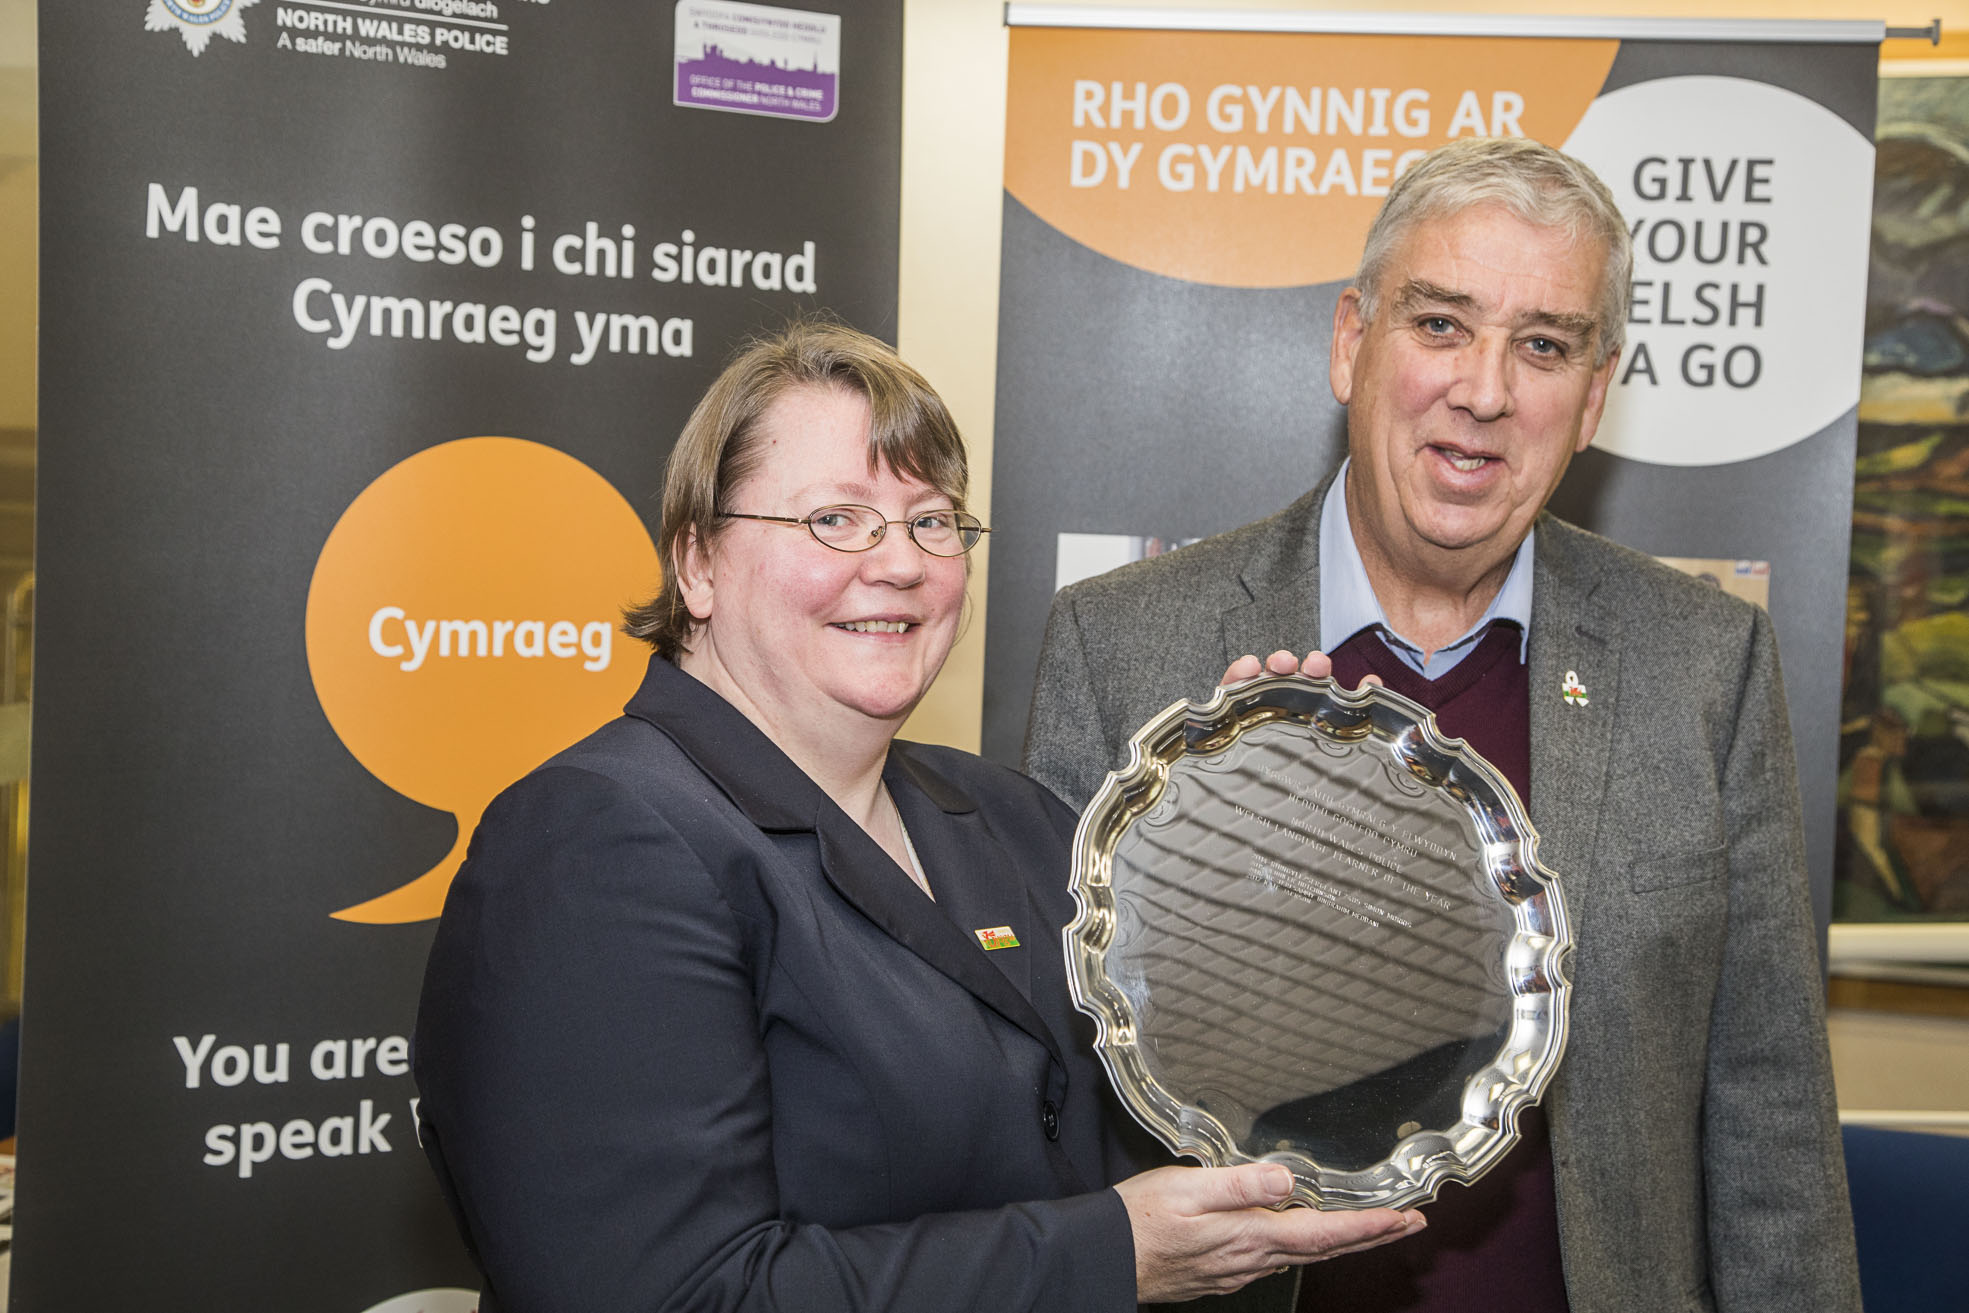 Bittersweet award for finance chief from Shropshire